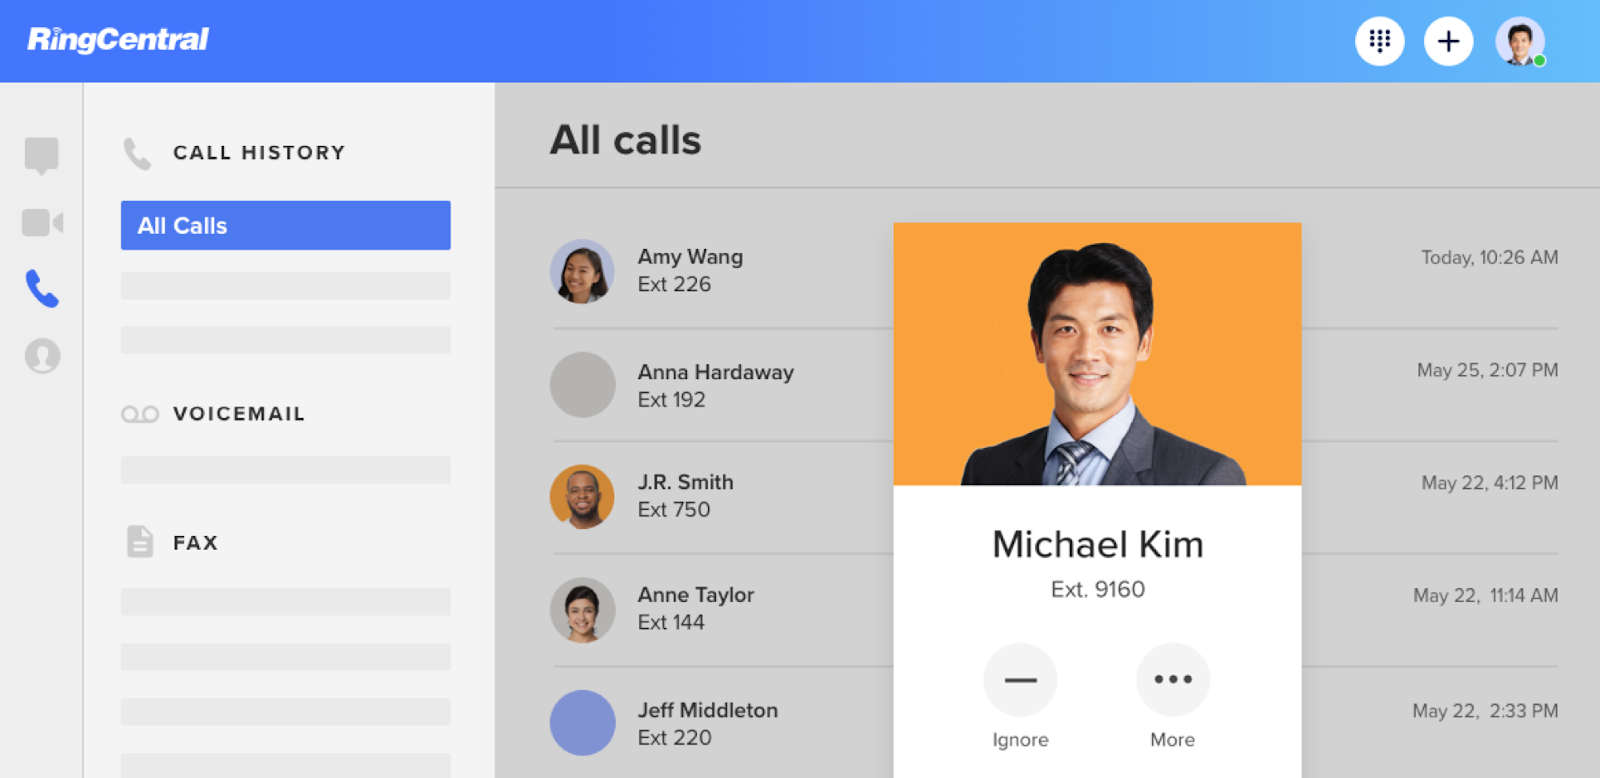 RingCentral's Internet Phone Service